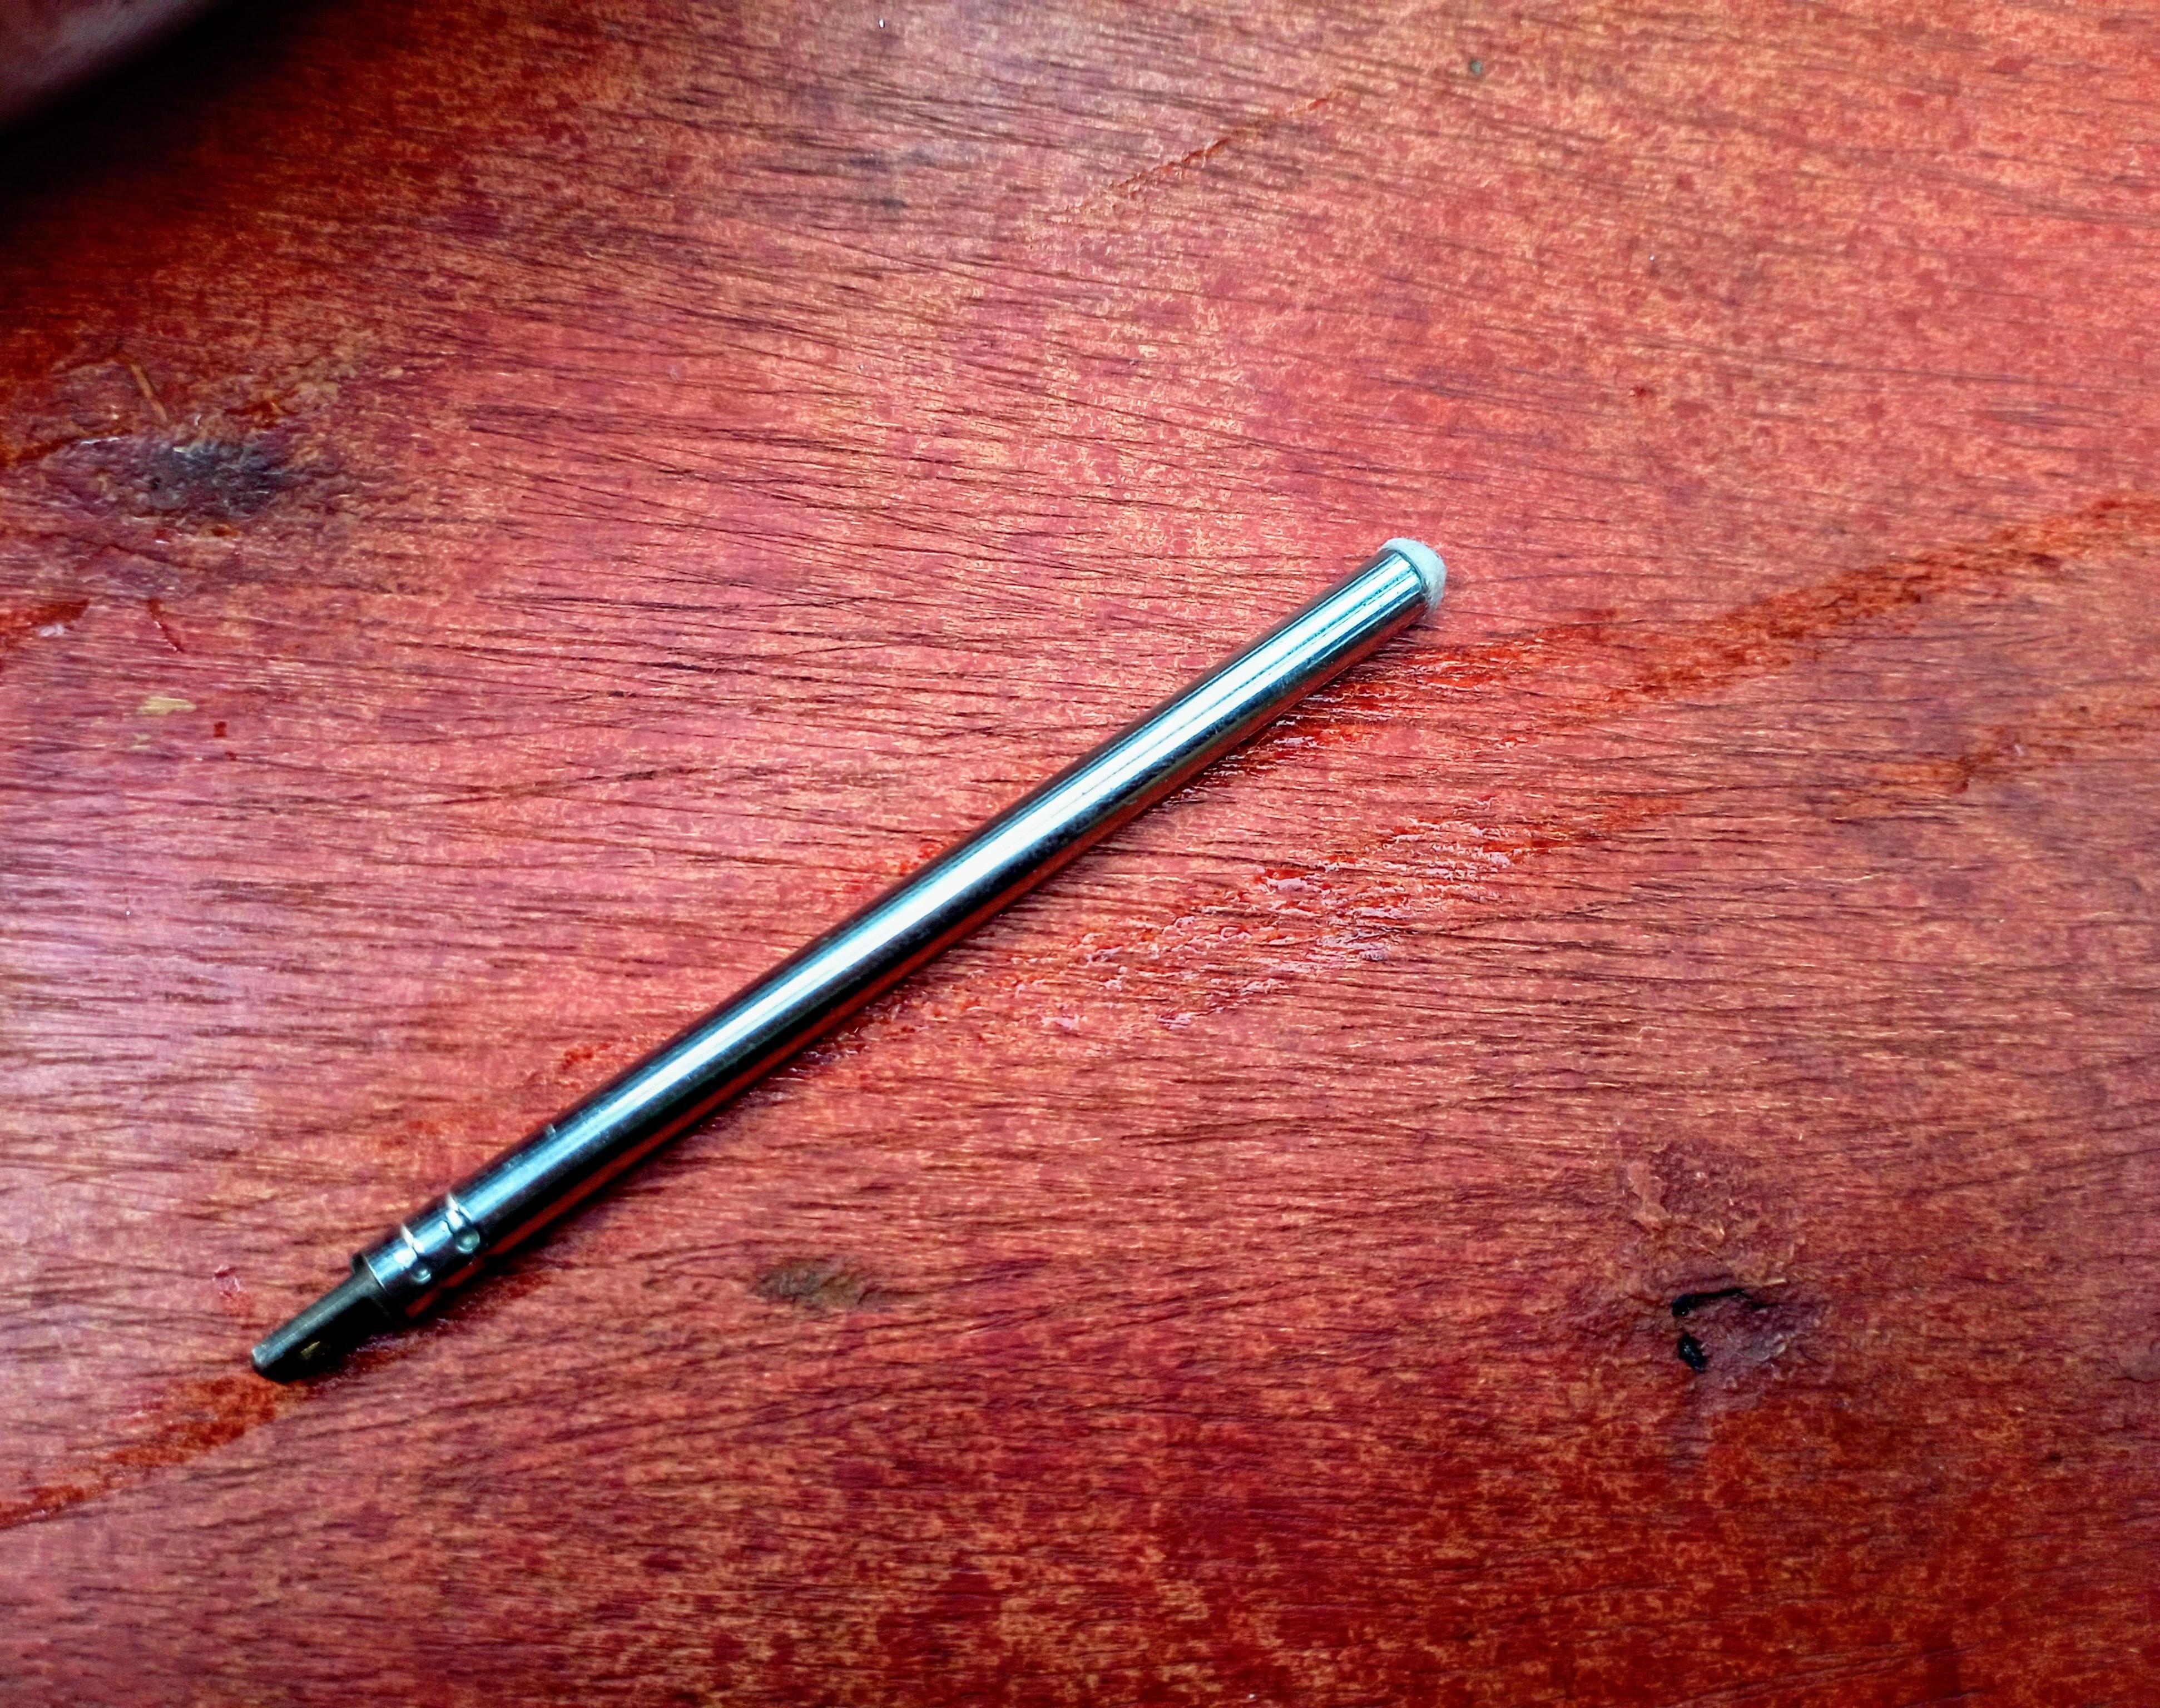 Long Lasting DIY Stylus Pen. Simple and Effective!